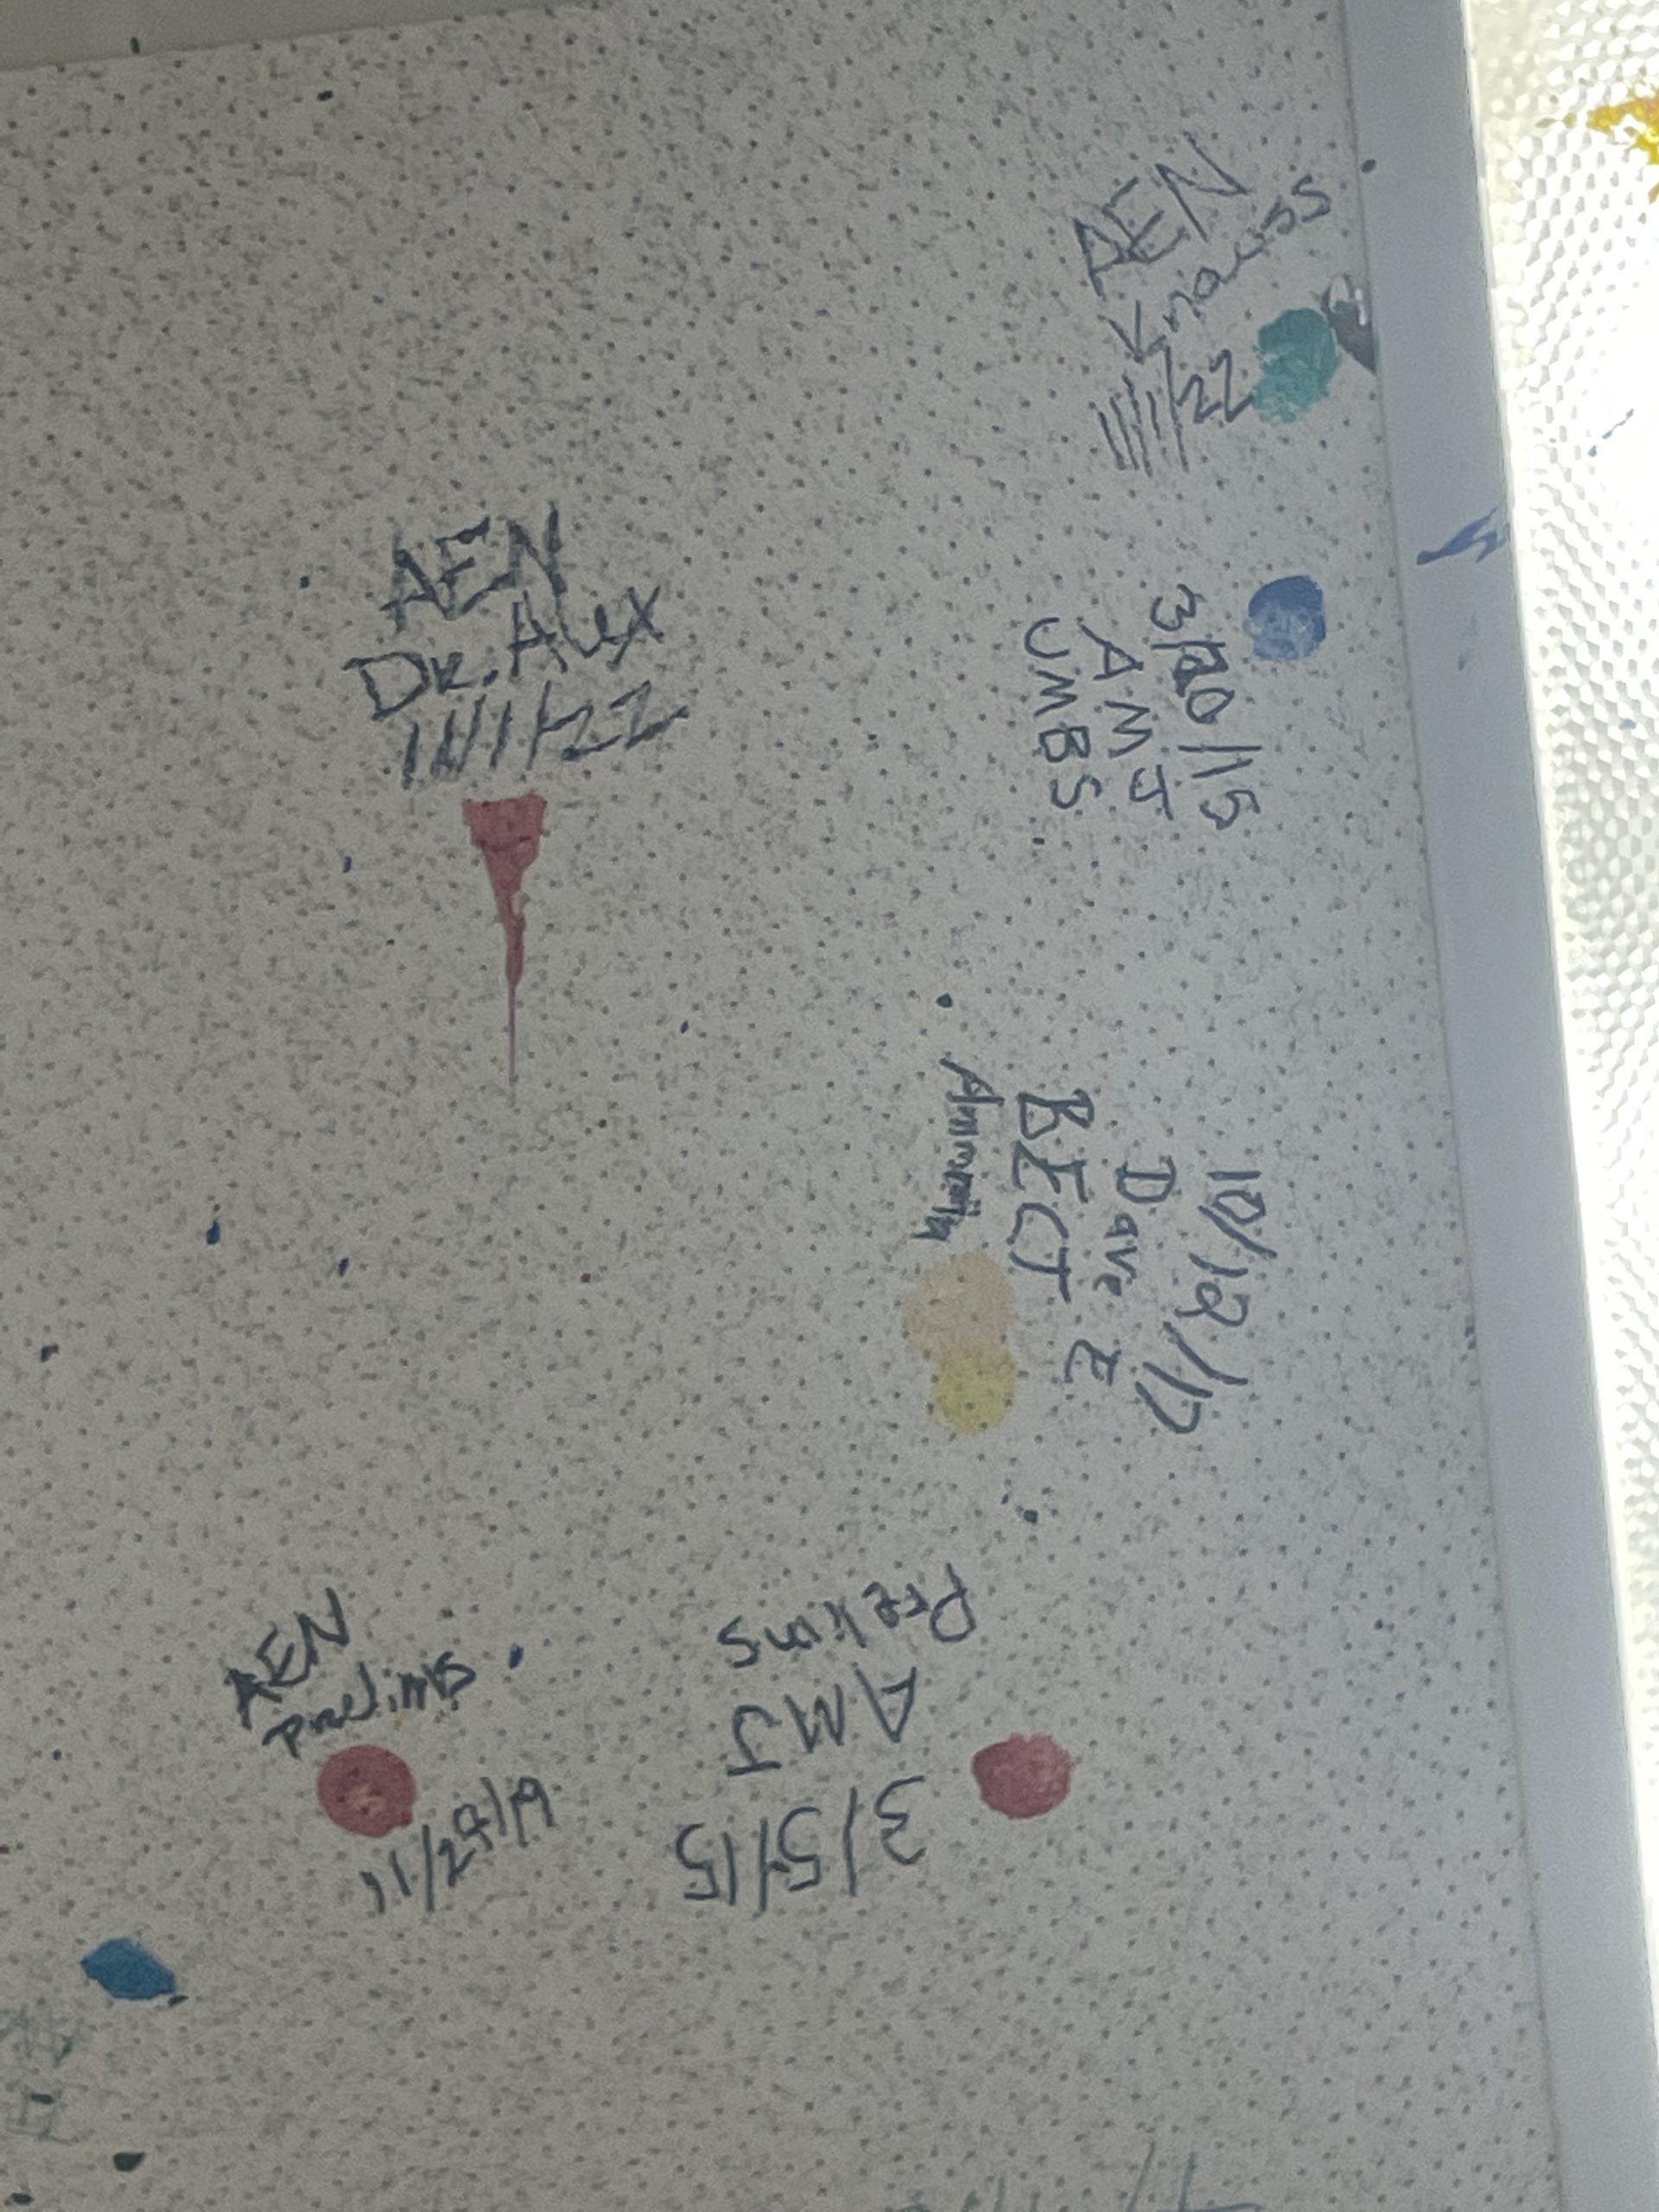 A close up picture of a ceiling tile with red, yellow, and green paint spots. Beside each paint spot are initials, a date, and the accomplishment being celebrated.